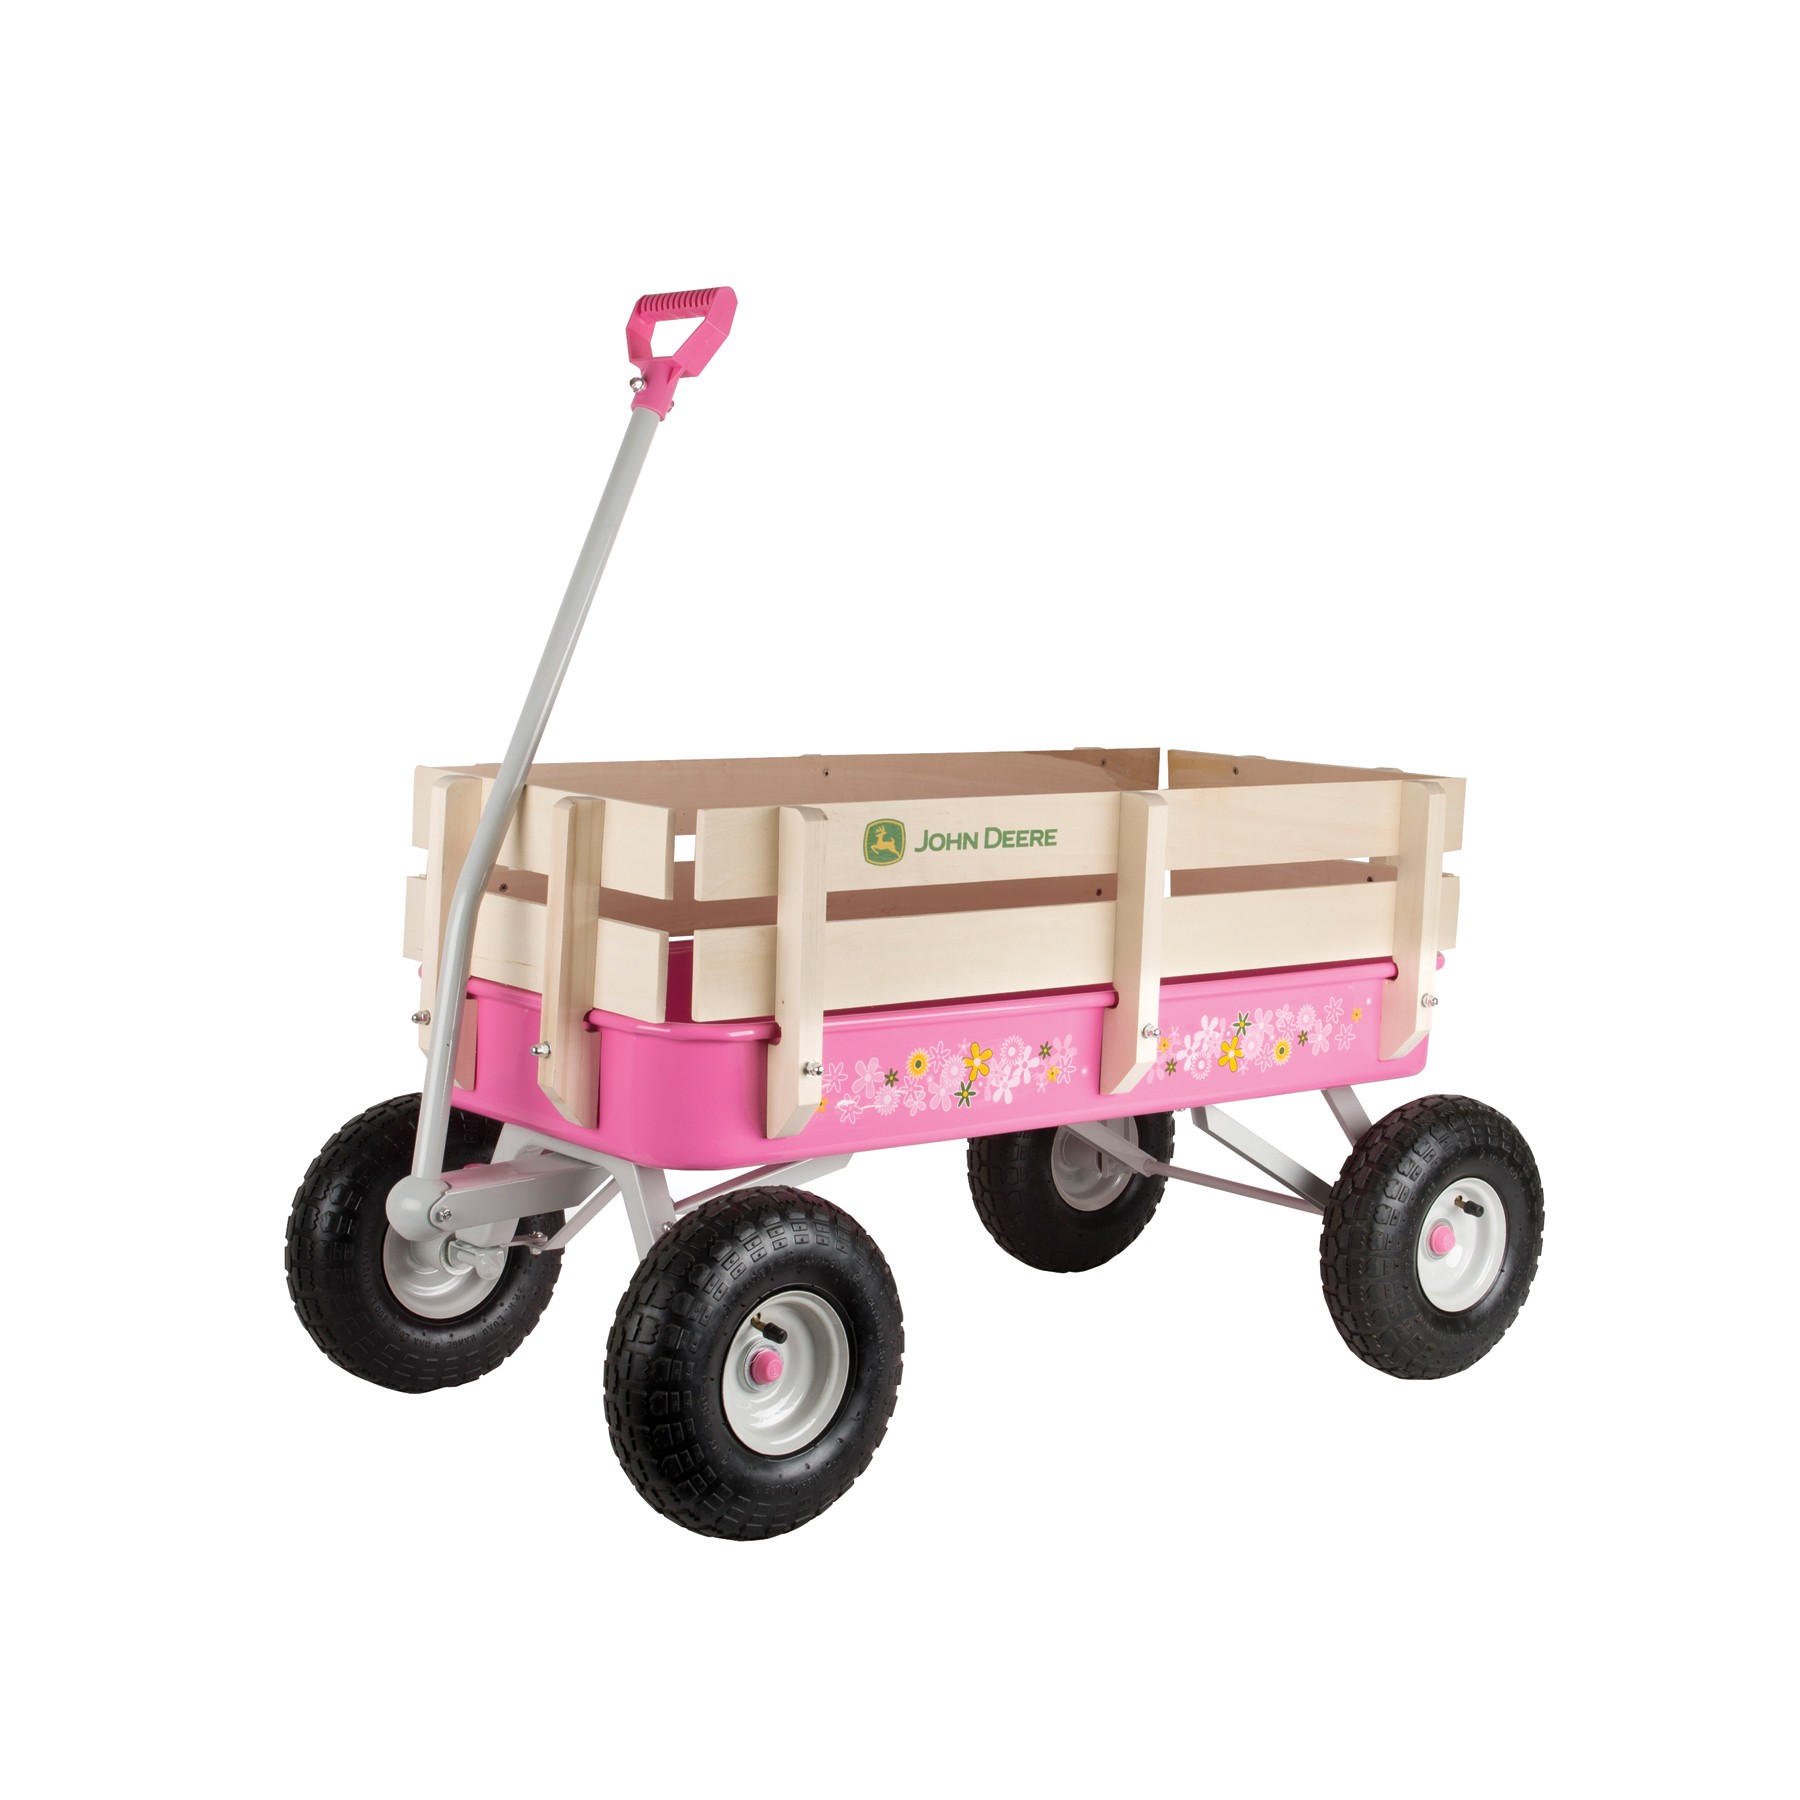 Flowers and the John Deere logo adorn this pink wagon.